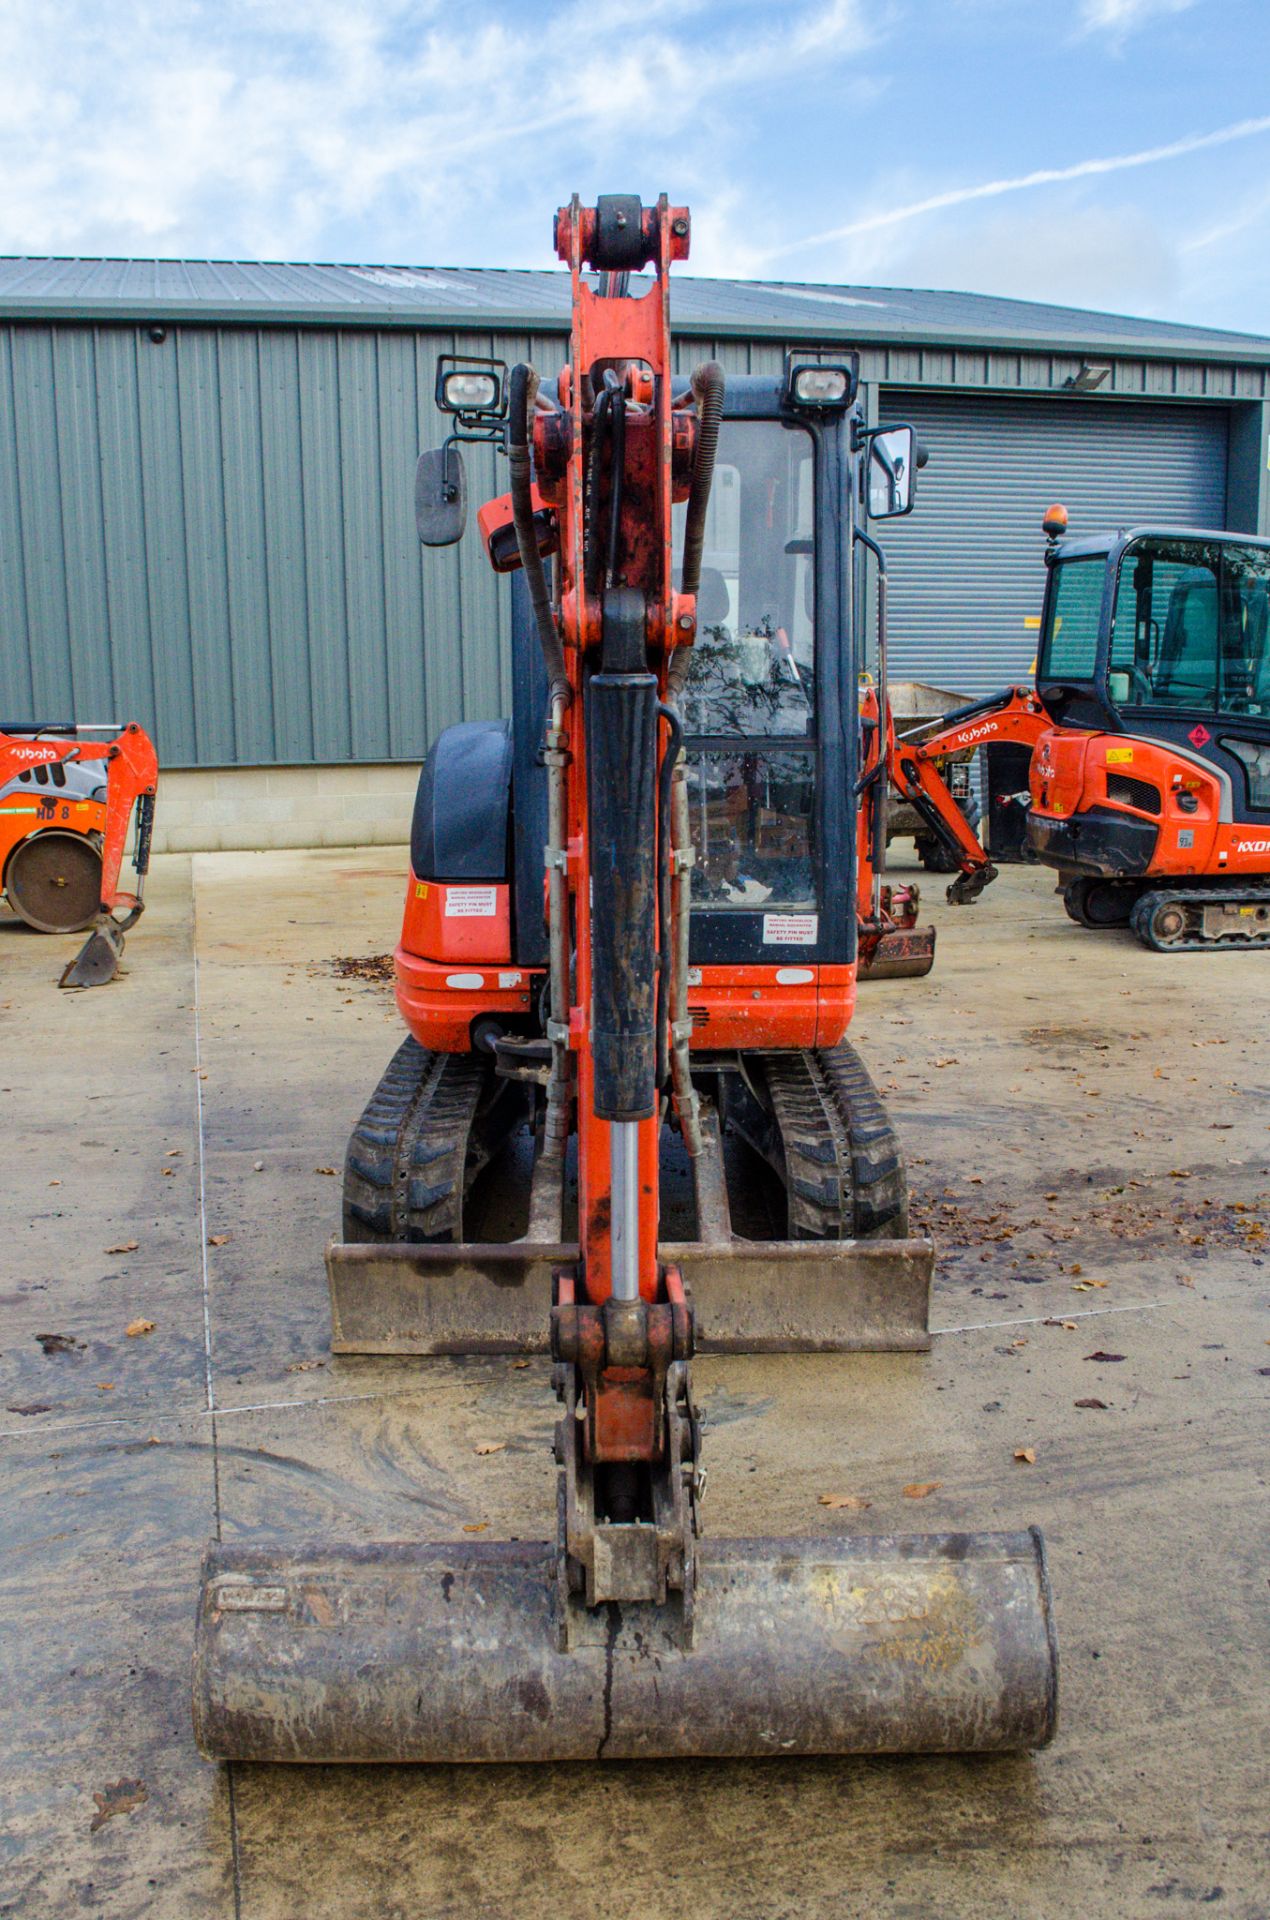 Kubota KX61-3 2.6 tonne rubber tracked excavator Year: 2015 S/N: 81787 Recorded Hours: 2860 EXC149 - Image 5 of 18